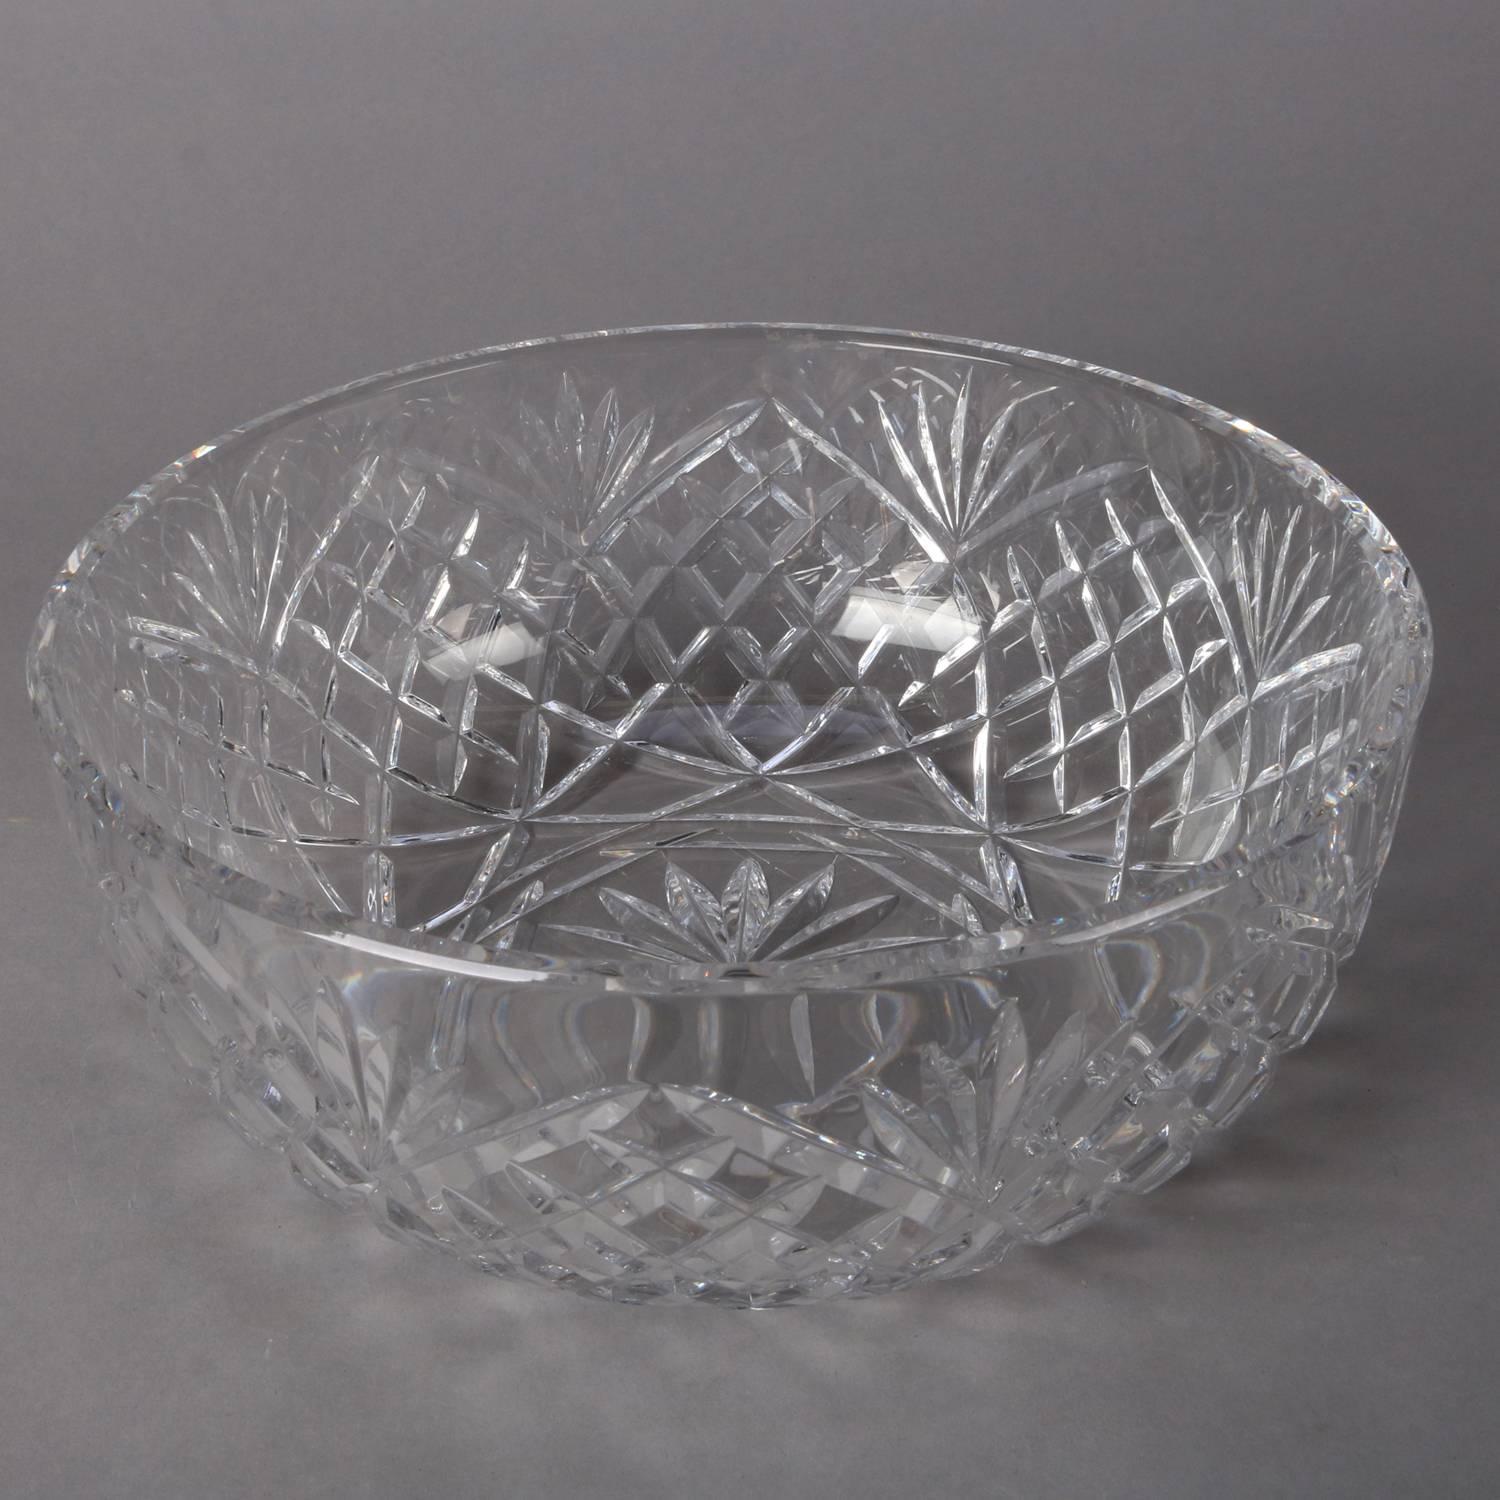 Waterford School American Brilliant Cut Glass bowl features squat form, pineapple cut design with cross-cut lower and palmette upper, 20th century

Measures: 4